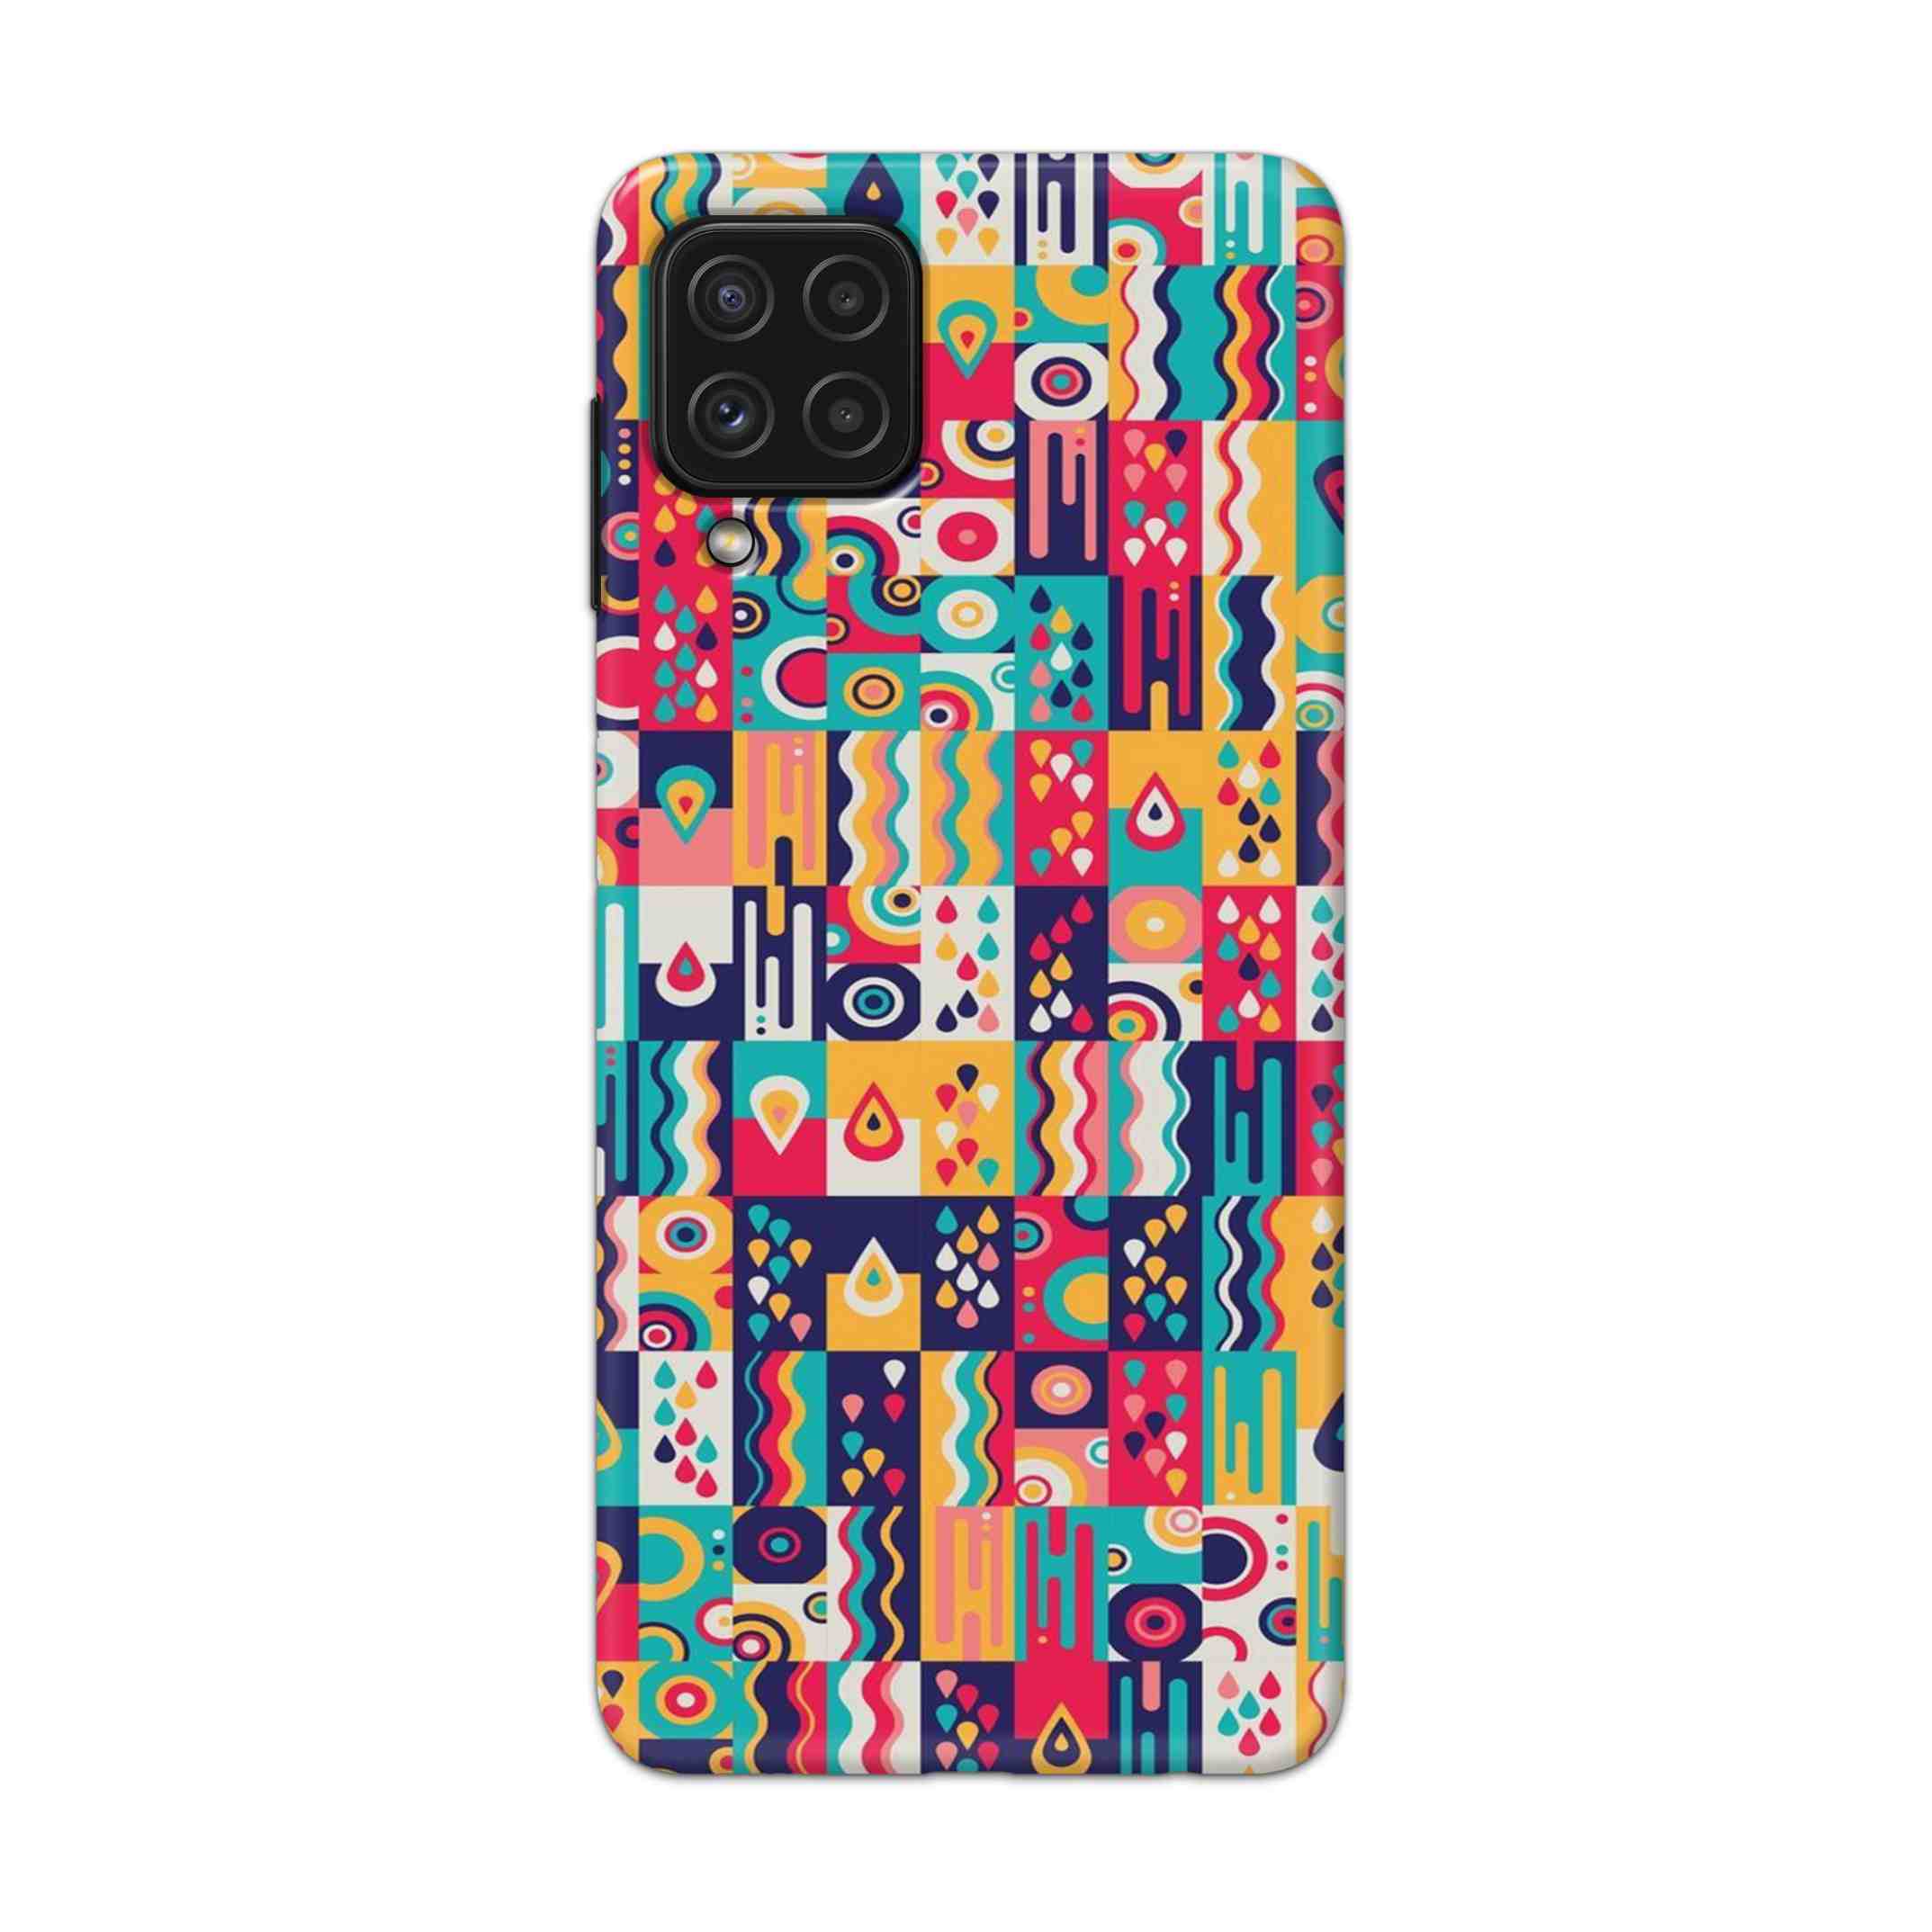 Buy Art Hard Back Mobile Phone Case Cover For Samsung Galaxy A22 Online